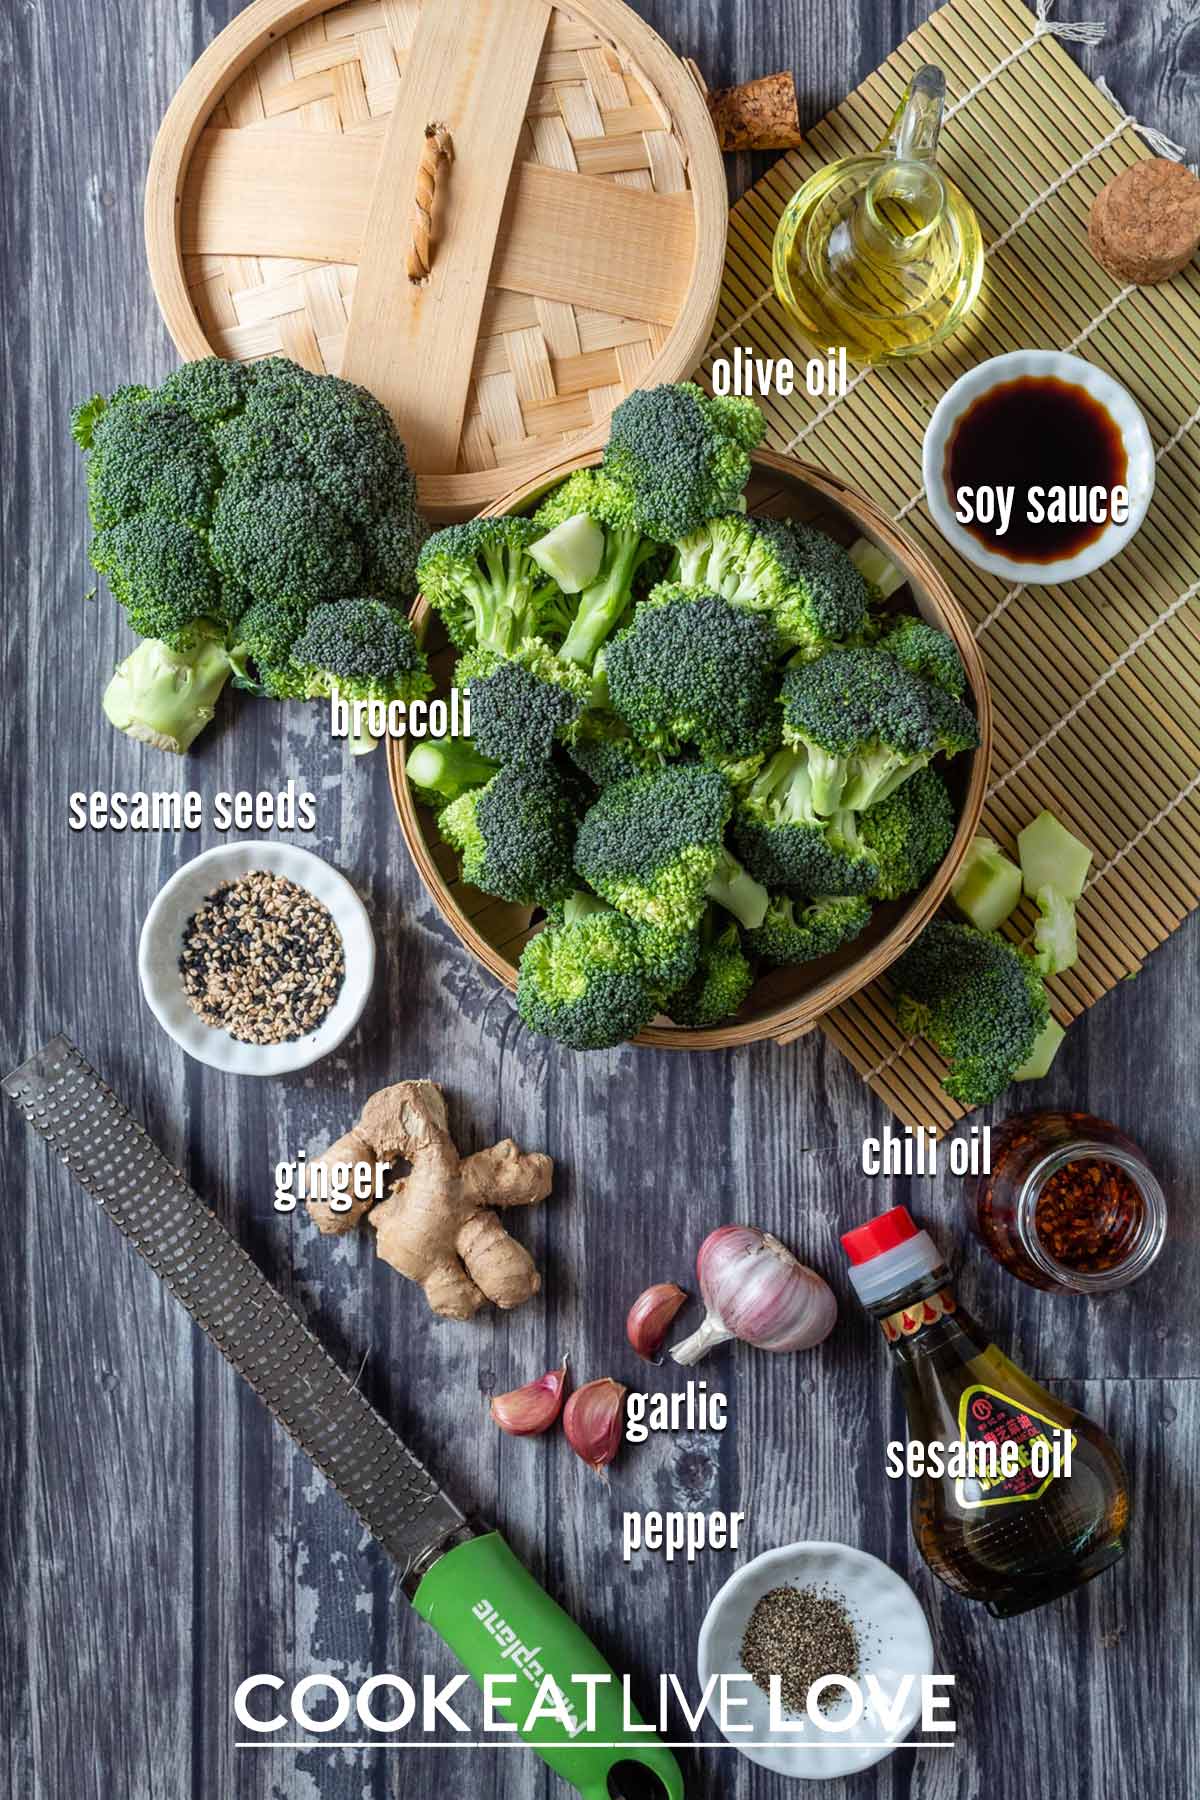 Ingredients to make asian broccoli on the table with text labels.